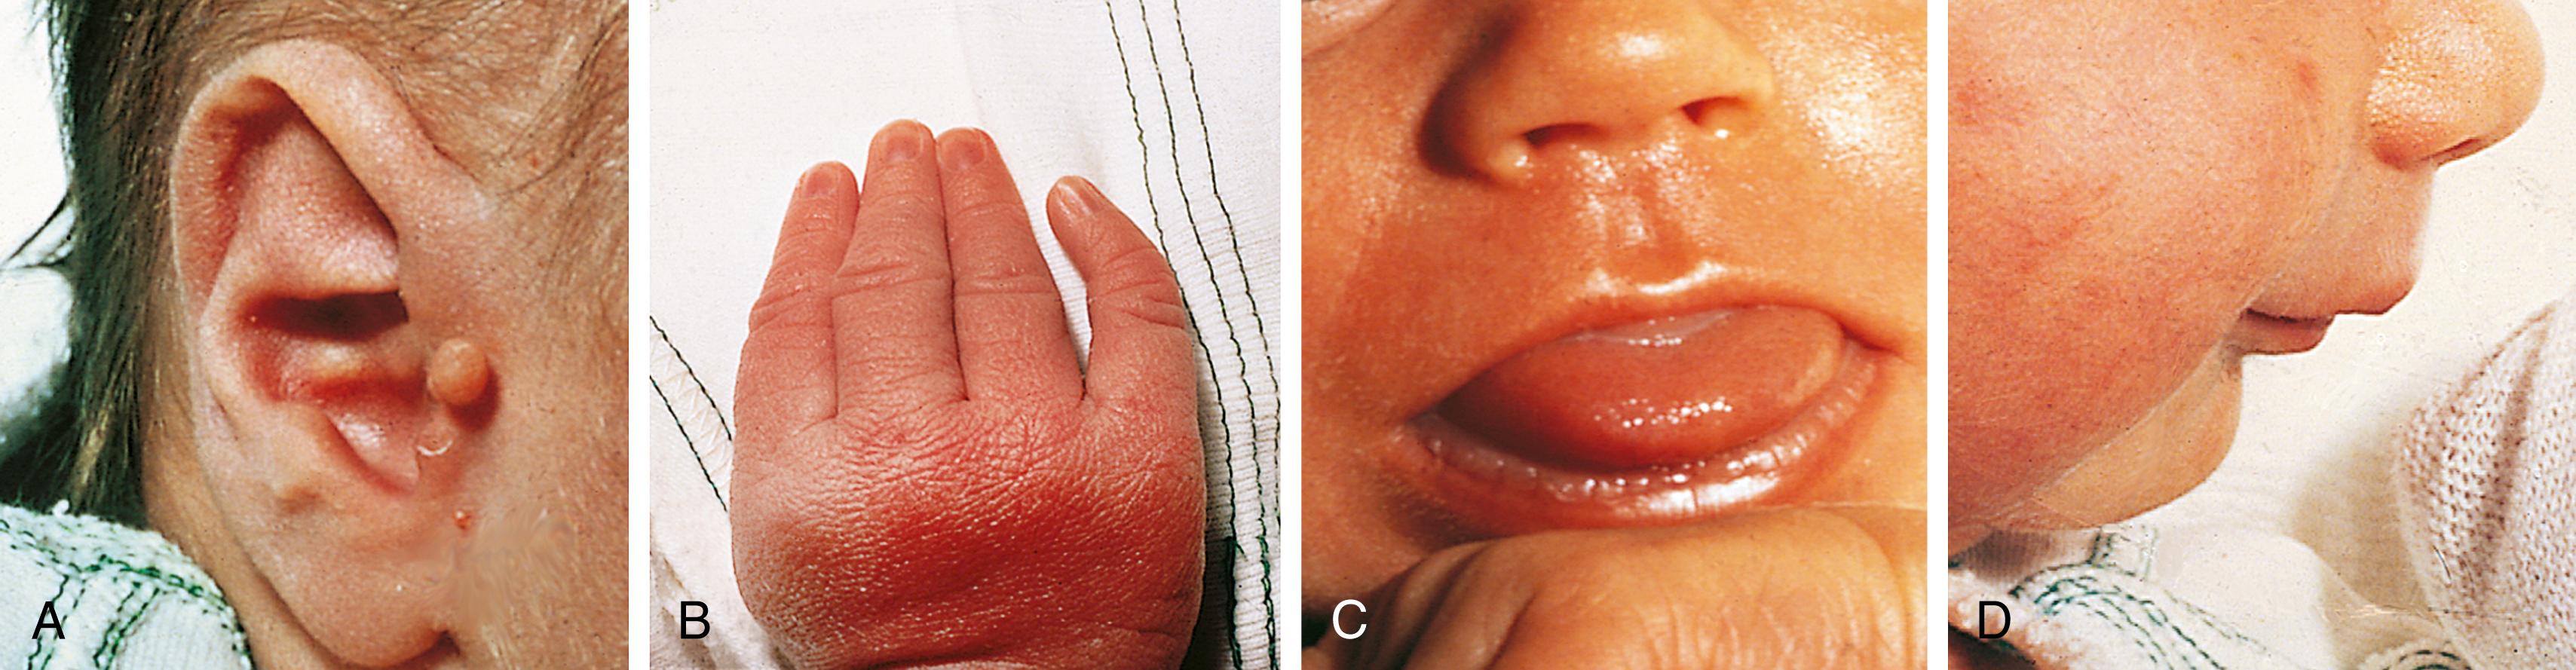 Fig. 1.1, Clinical photographs show several minor anomalies seen at birth. (A) Preauricular skin tag. (B) Clinodactyly of the fifth finger. (C) Macroglossia. (D) Microretrognathia.